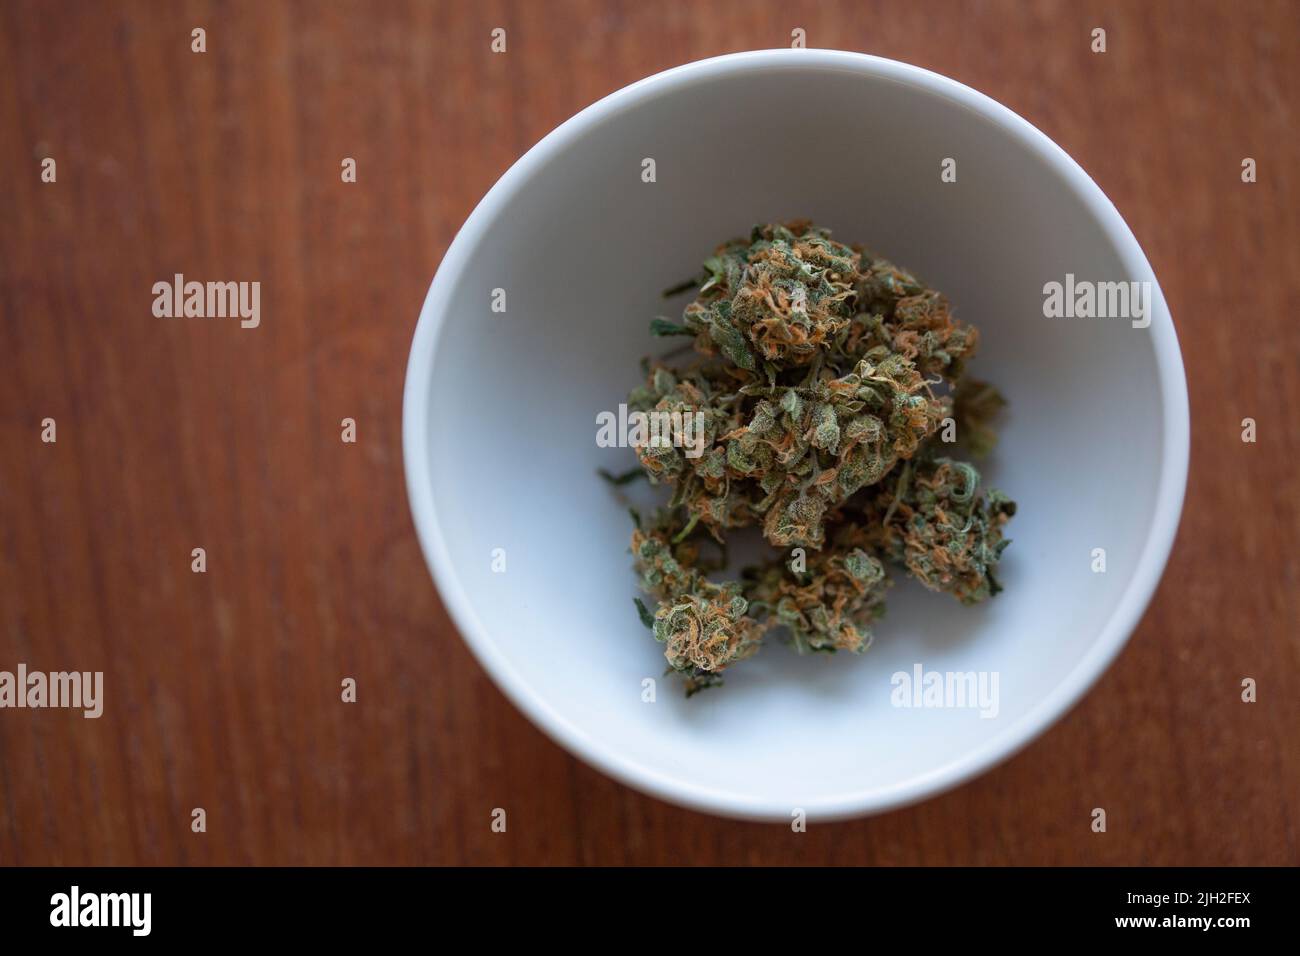 Top view of a bowl with cannabis sativa Stock Photo